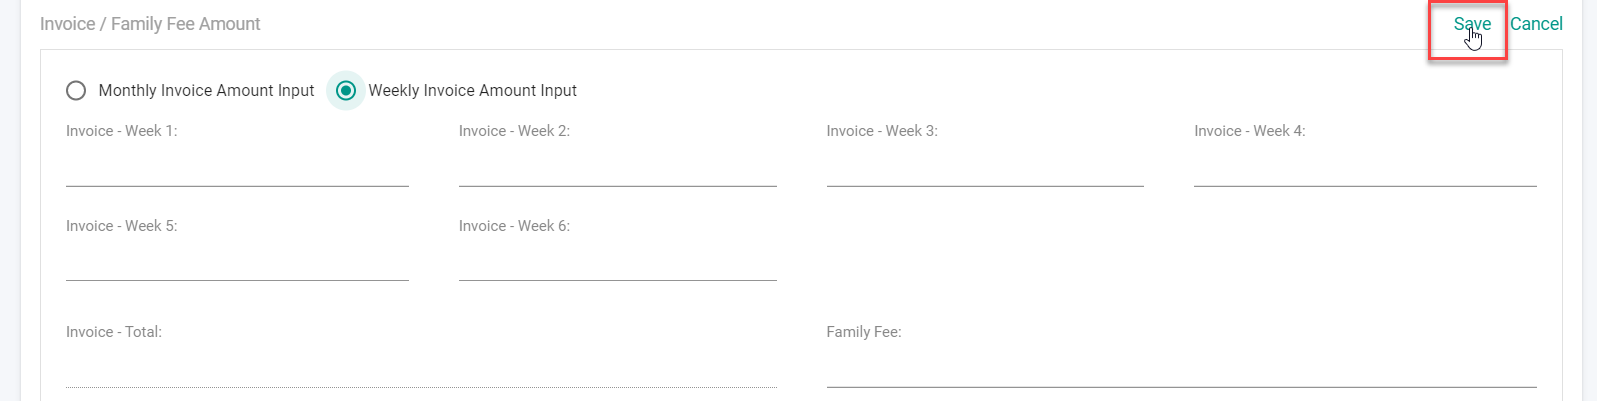 7.save_invoice.png